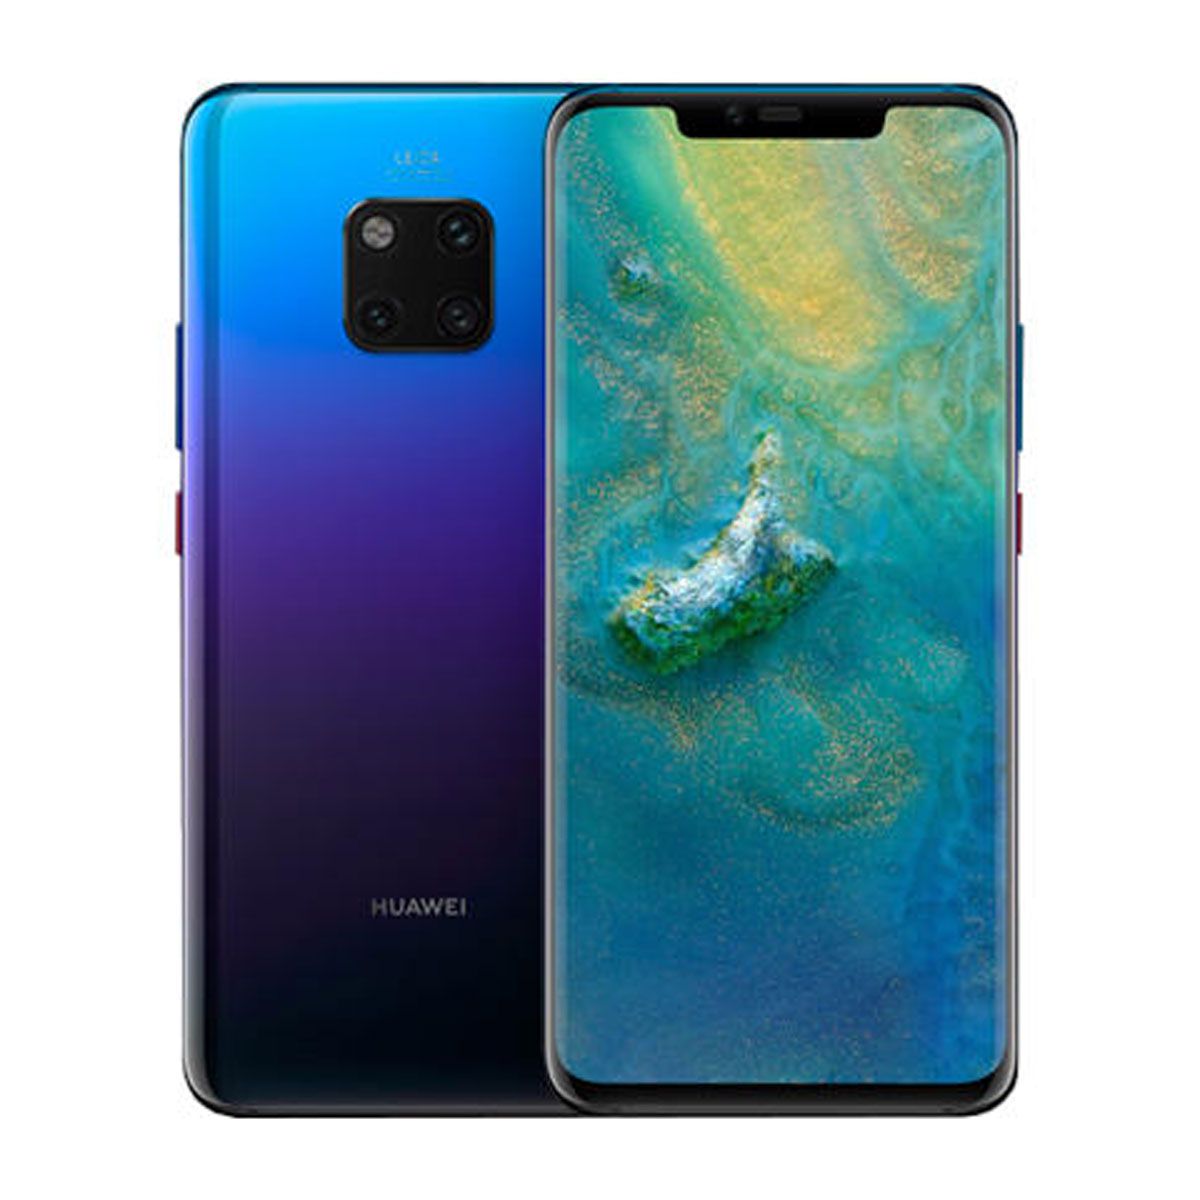 Huawei Mate 20 Pro Price in Pakistan Detail & Full Phone Specifications